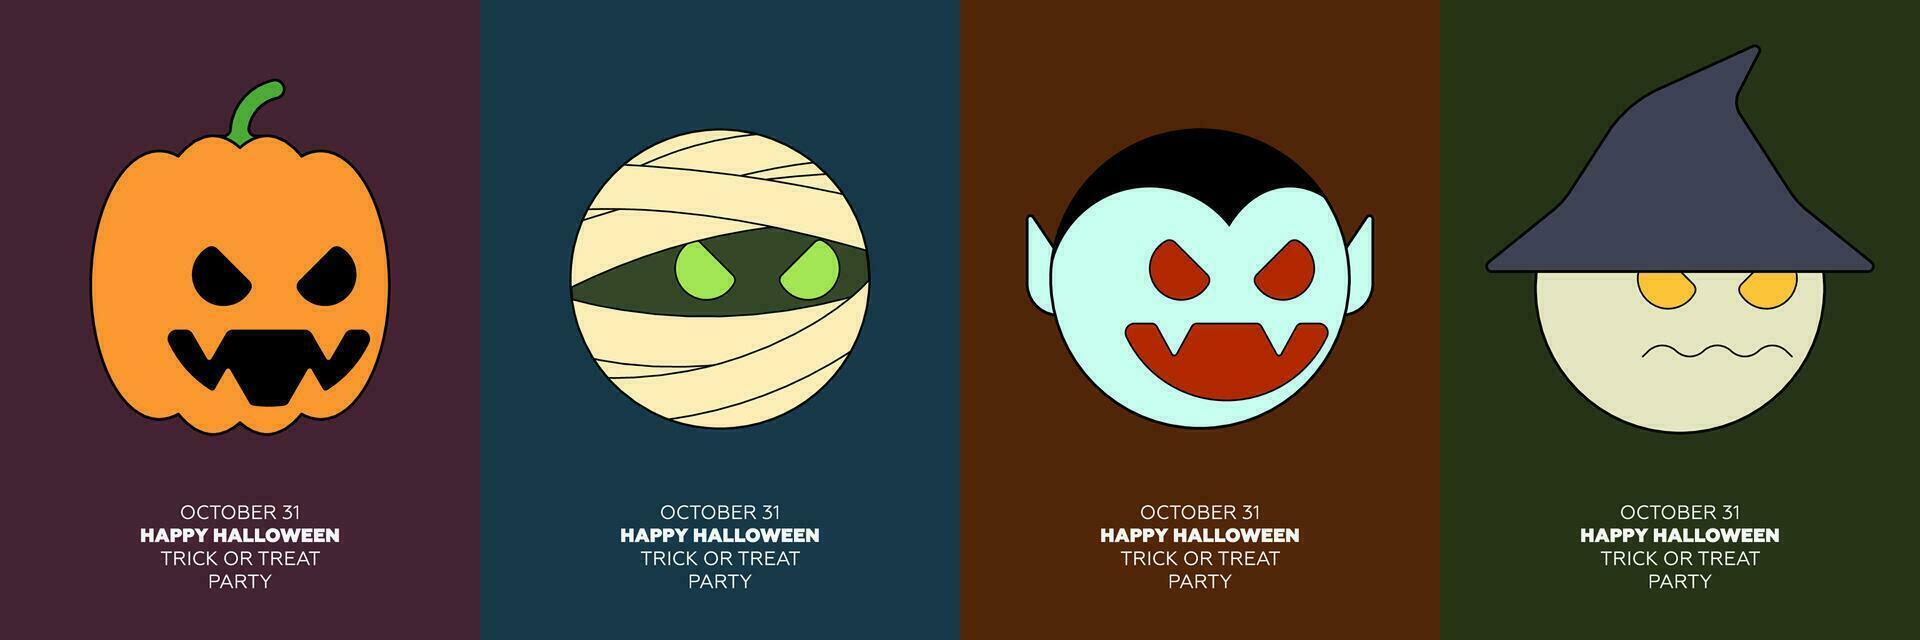 Happy Halloween trick or treat party poster set with geometric characters. October 31 holiday event. Pumpkin, mummy, vampire and witch minimalistic graphic mascots on colourful cover. Trendy eps print vector